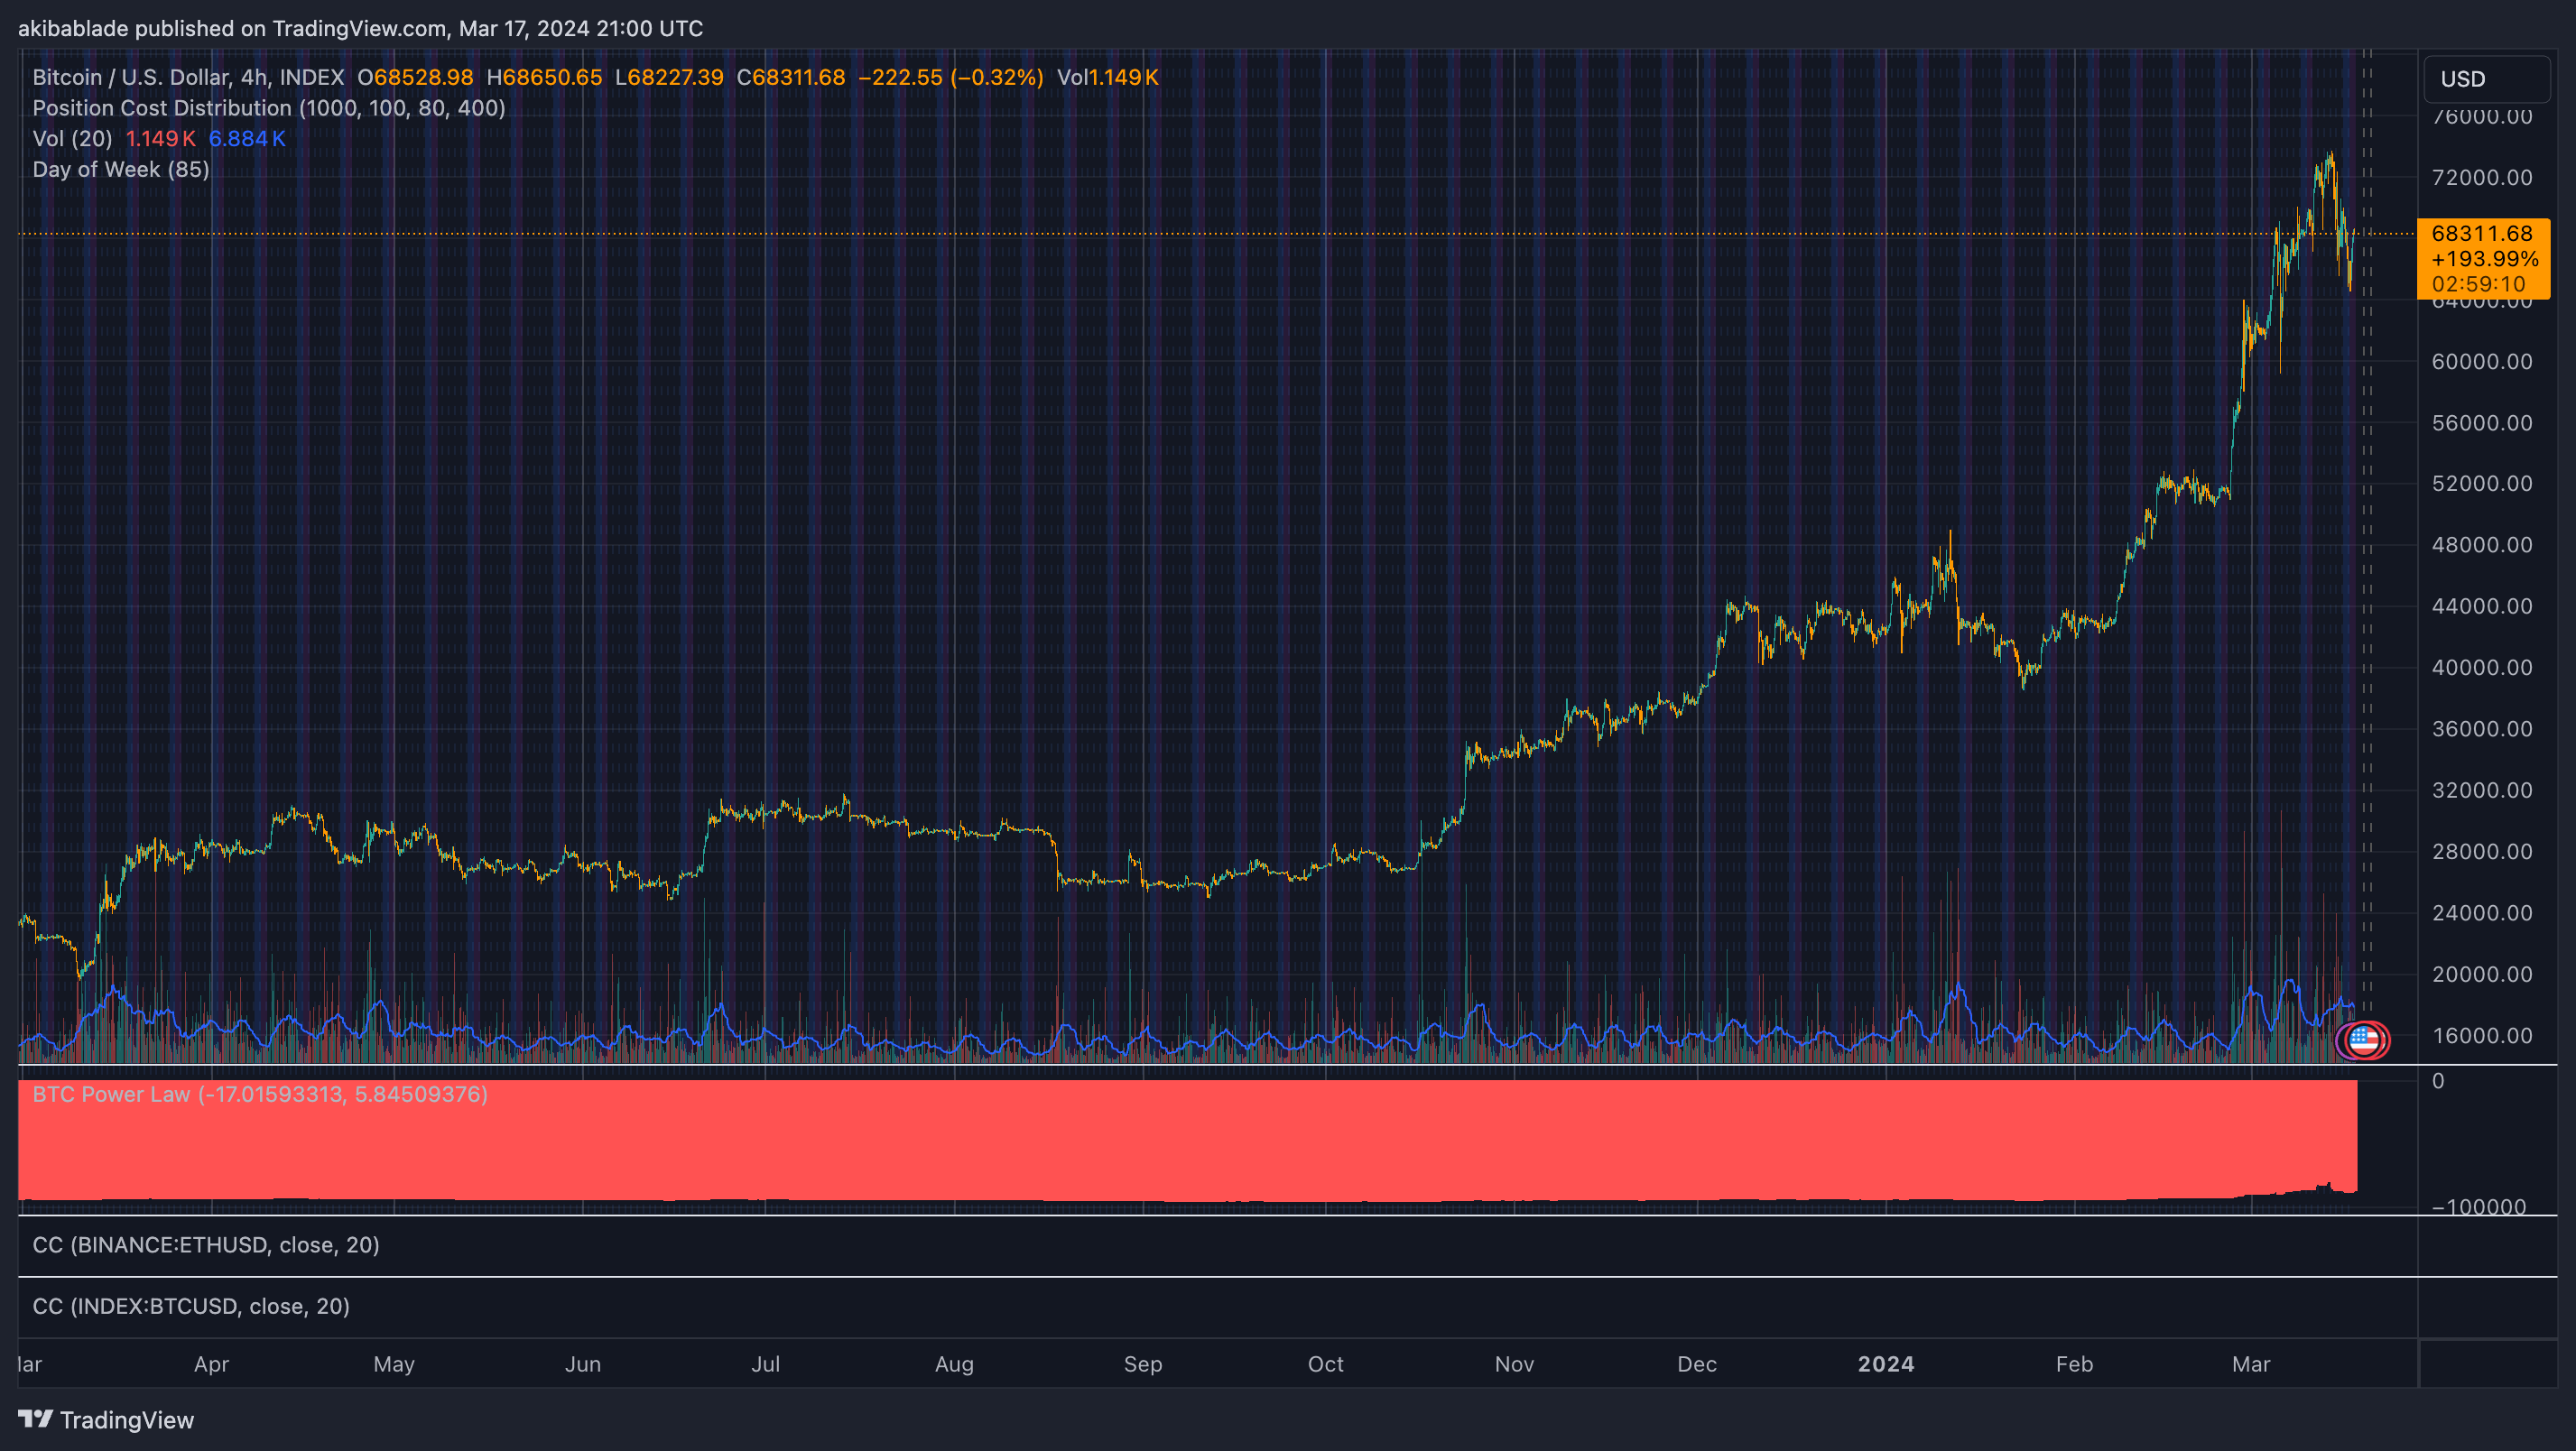 Bitcoin weekend trading 2023 (Source: TradingView)